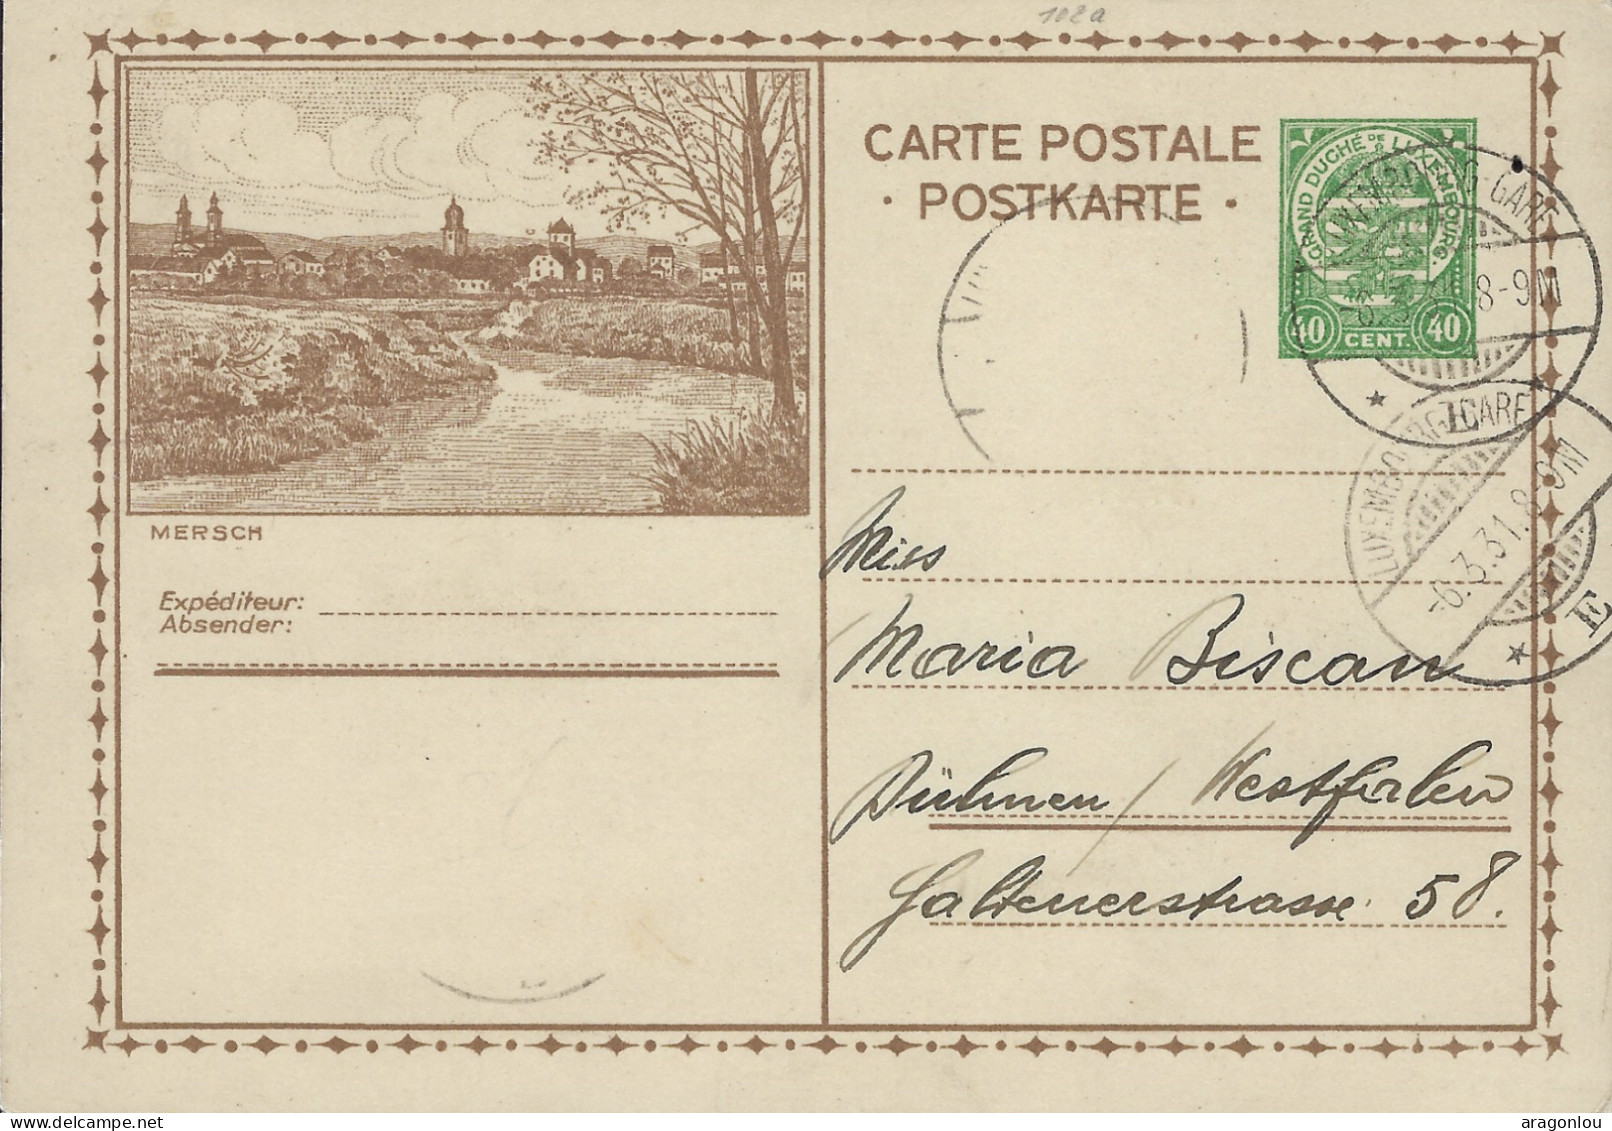 Luxembourg - Luxemburg - Carte-Postale  1931  -  Mersch -   Cachet  Luxembourg - Stamped Stationery